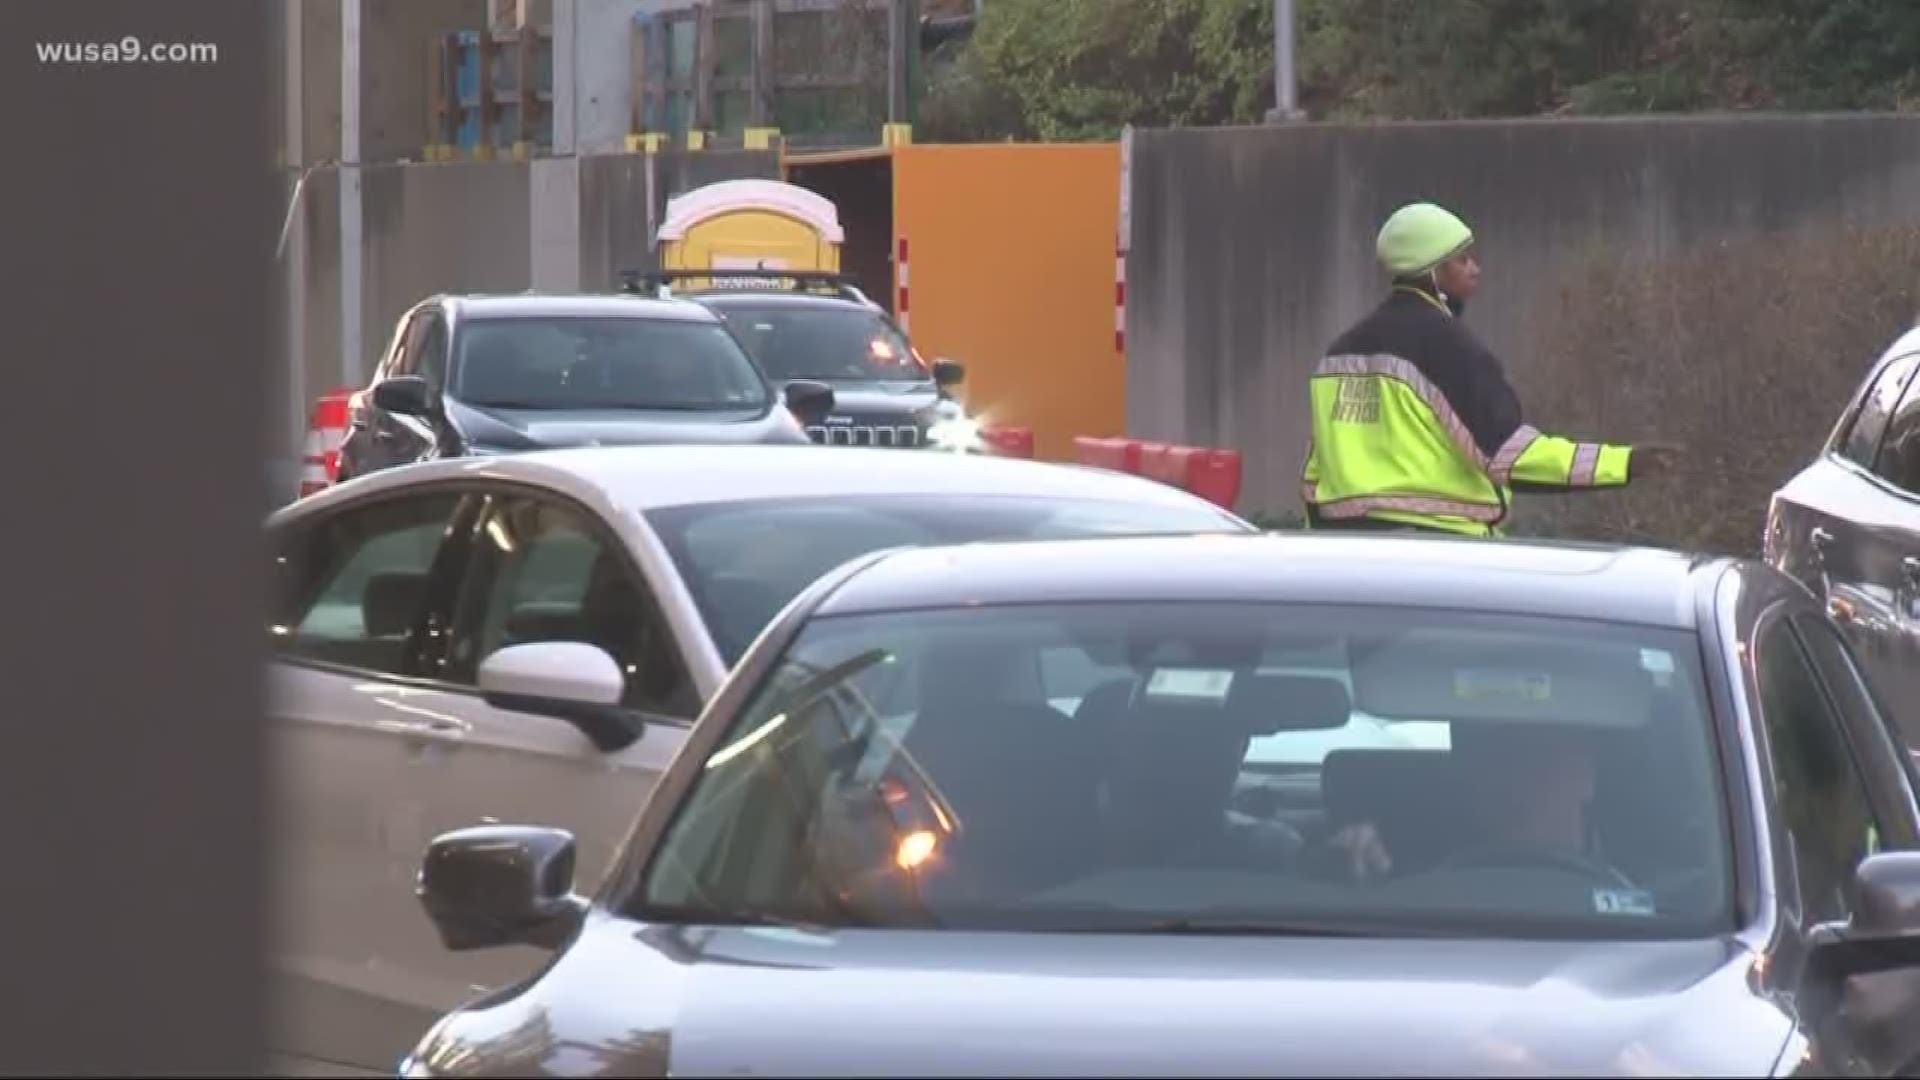 Officials say that traffic to airports in the DMV is only going to increase this holiday season. Now, they are sharing their tips for beating the holiday rush.